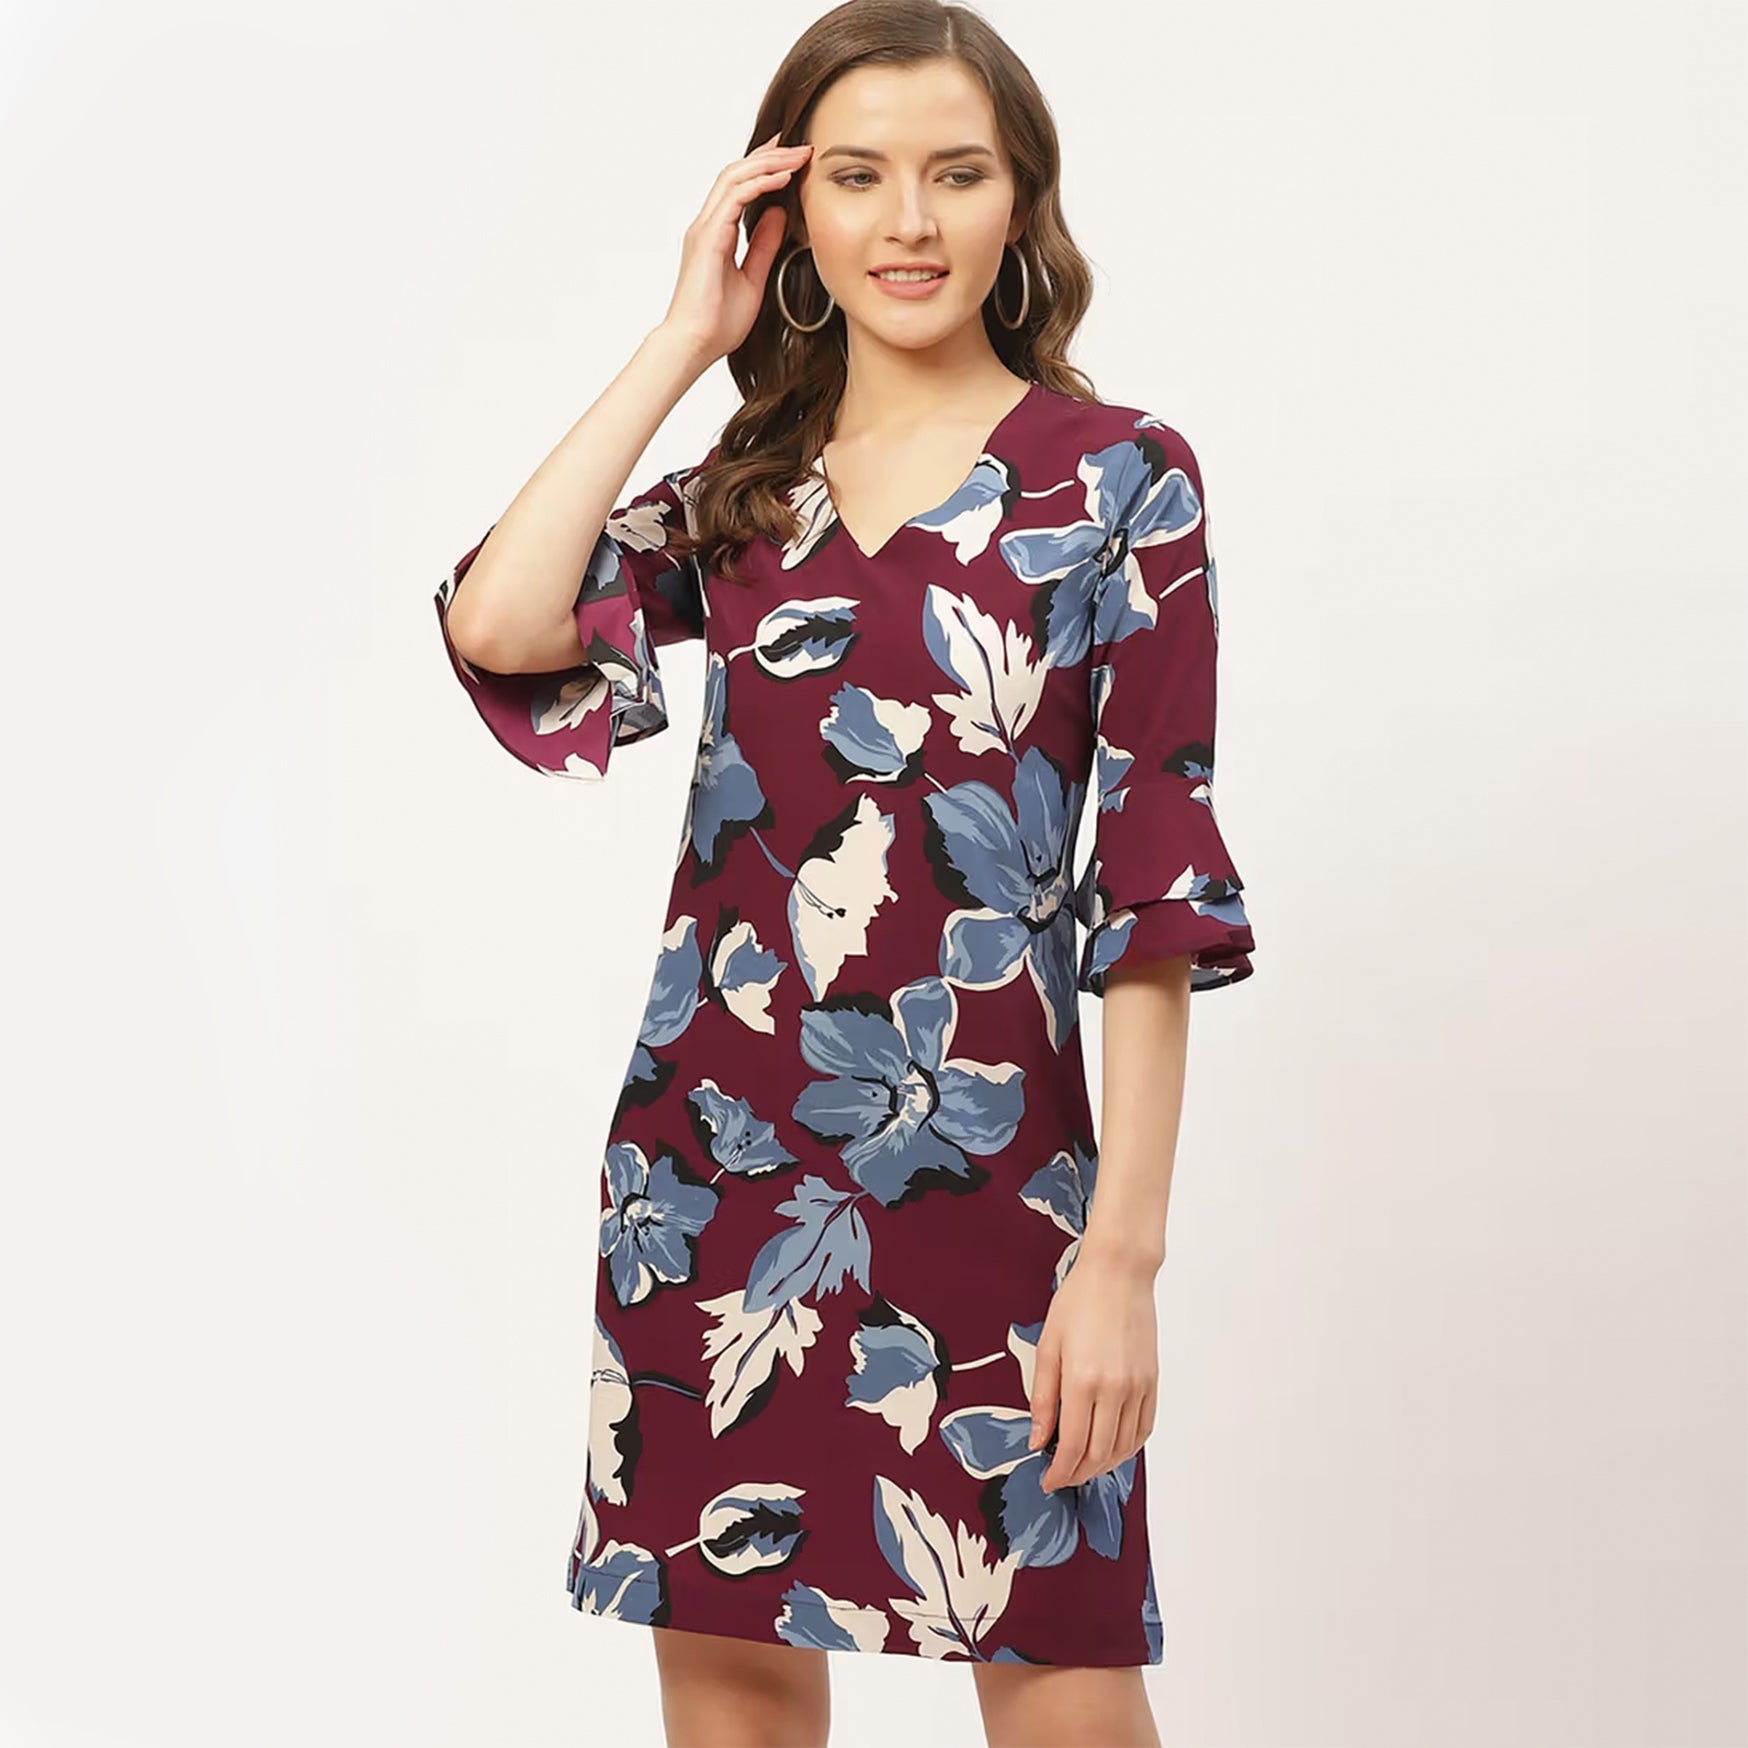 Women Burgundy and Blue Floral Printed A-Line Dress (S)